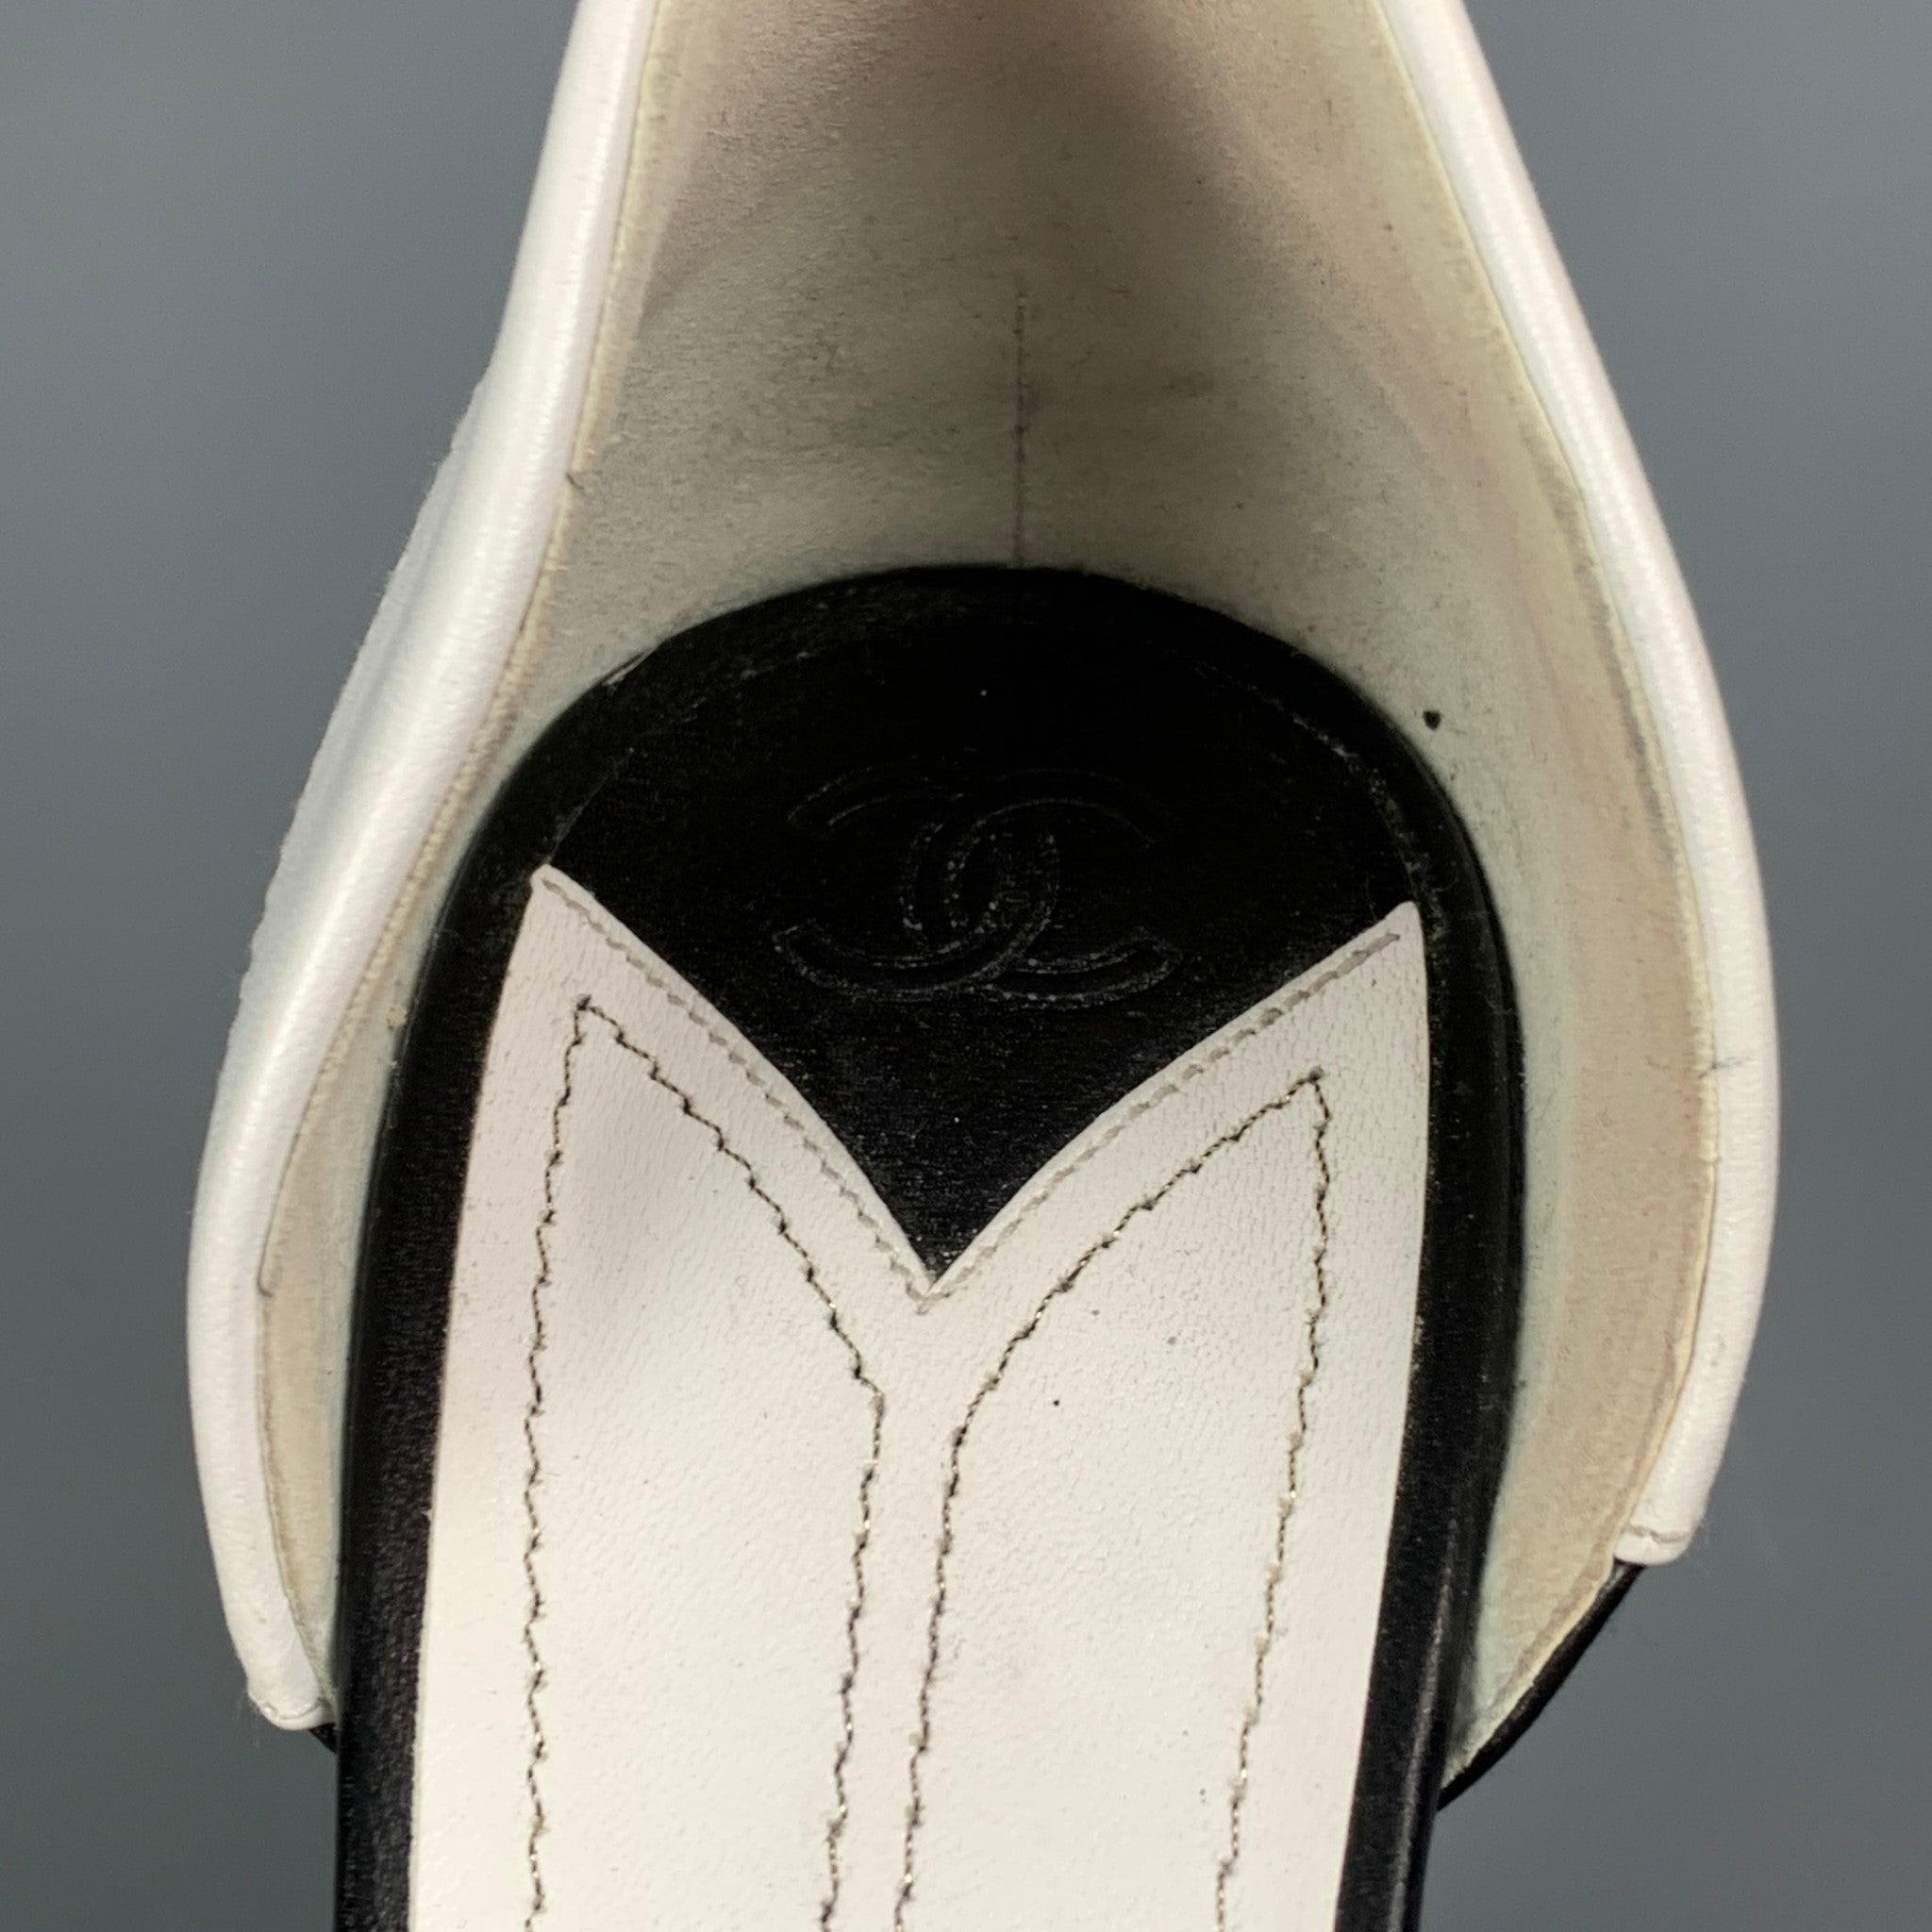 CHANEL Size 10 White & Black Two Tone Leather D'Orsay Pumps 2